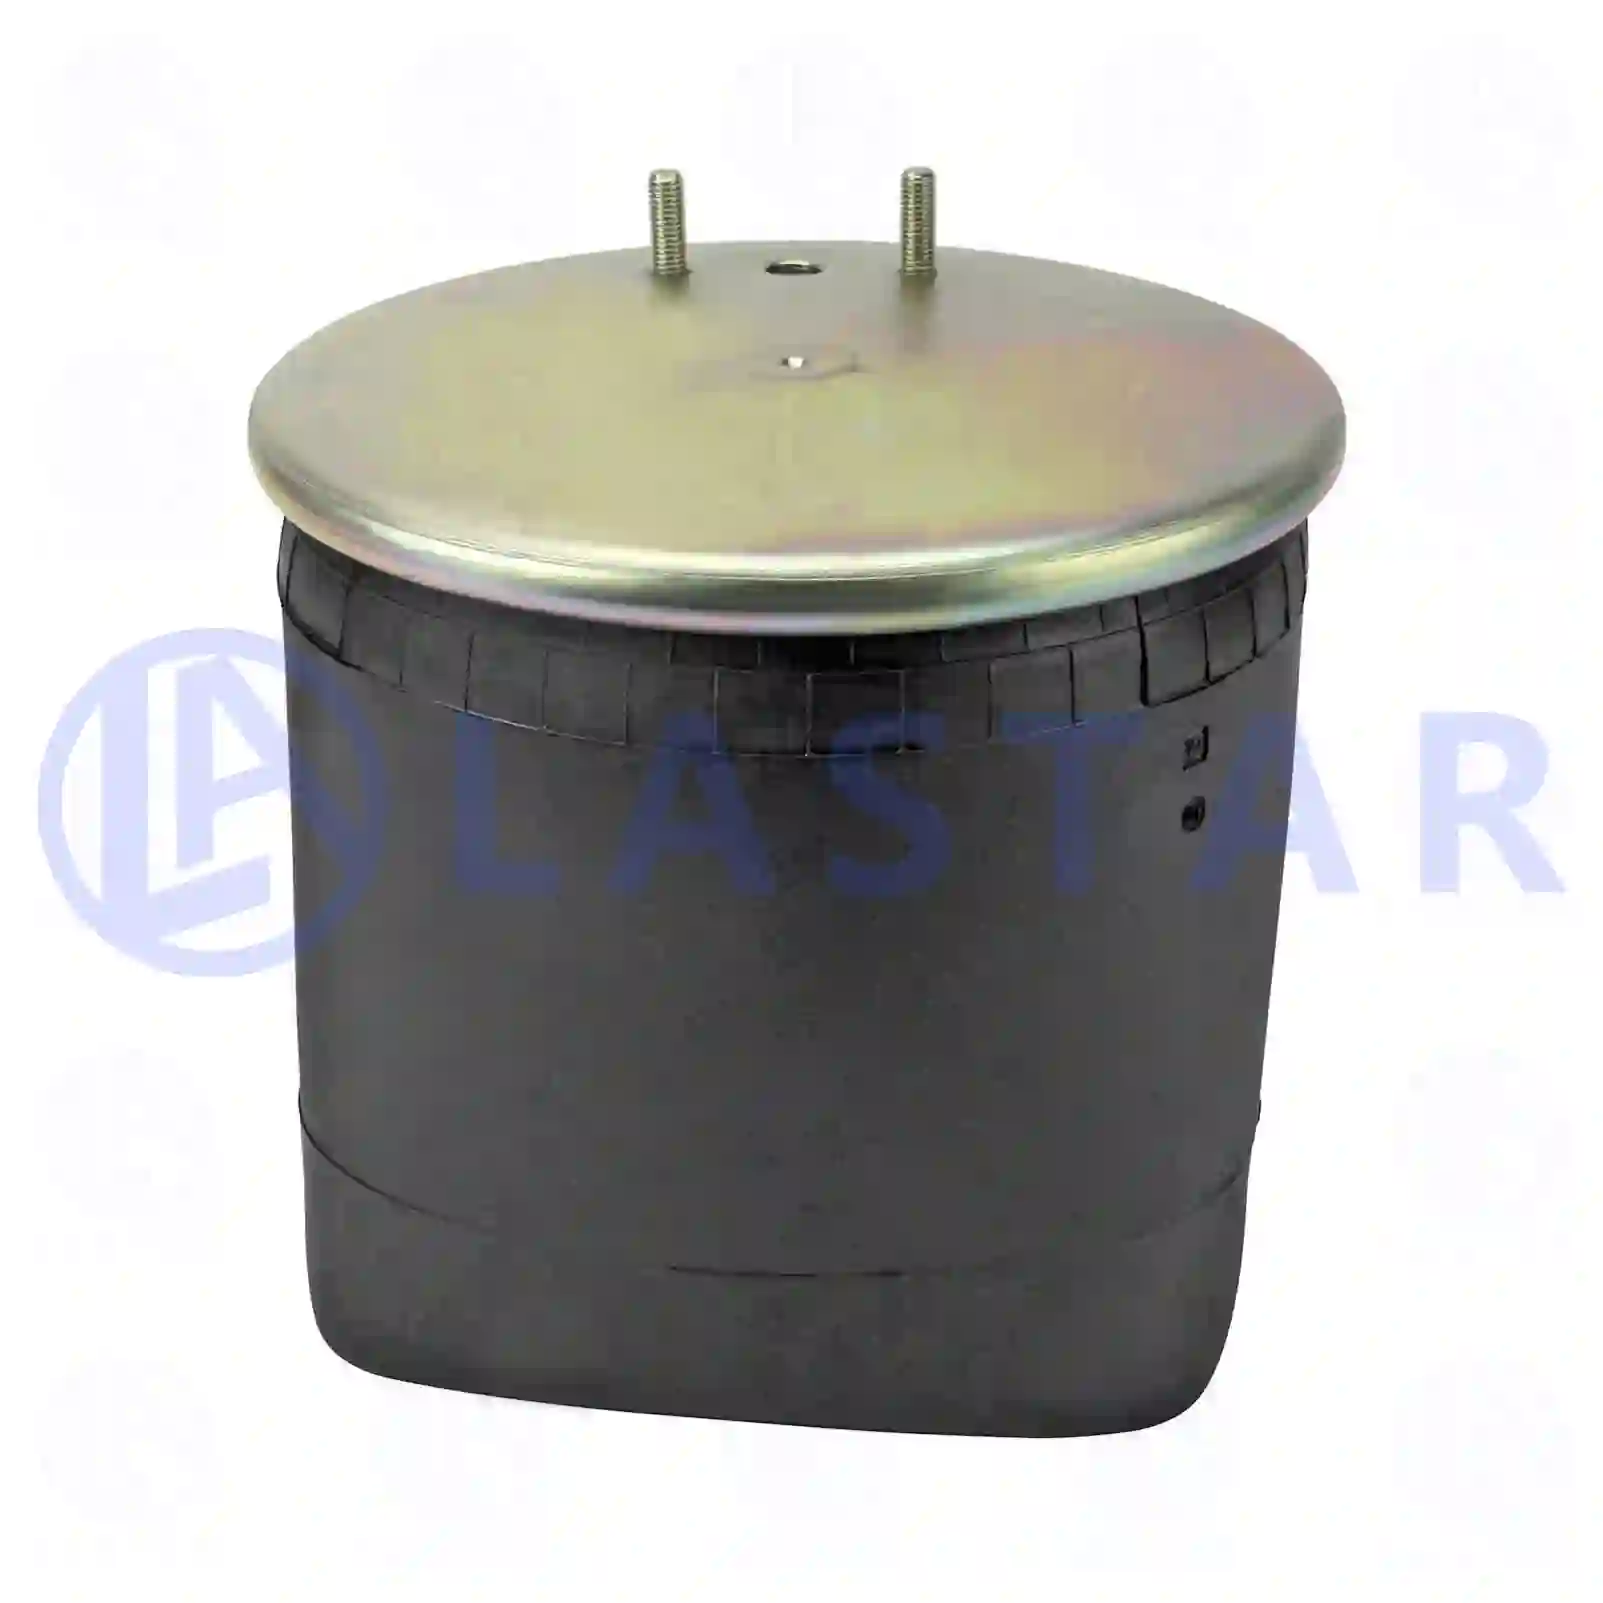 Air spring, without piston, 77729668, 1076595 ||  77729668 Lastar Spare Part | Truck Spare Parts, Auotomotive Spare Parts Air spring, without piston, 77729668, 1076595 ||  77729668 Lastar Spare Part | Truck Spare Parts, Auotomotive Spare Parts